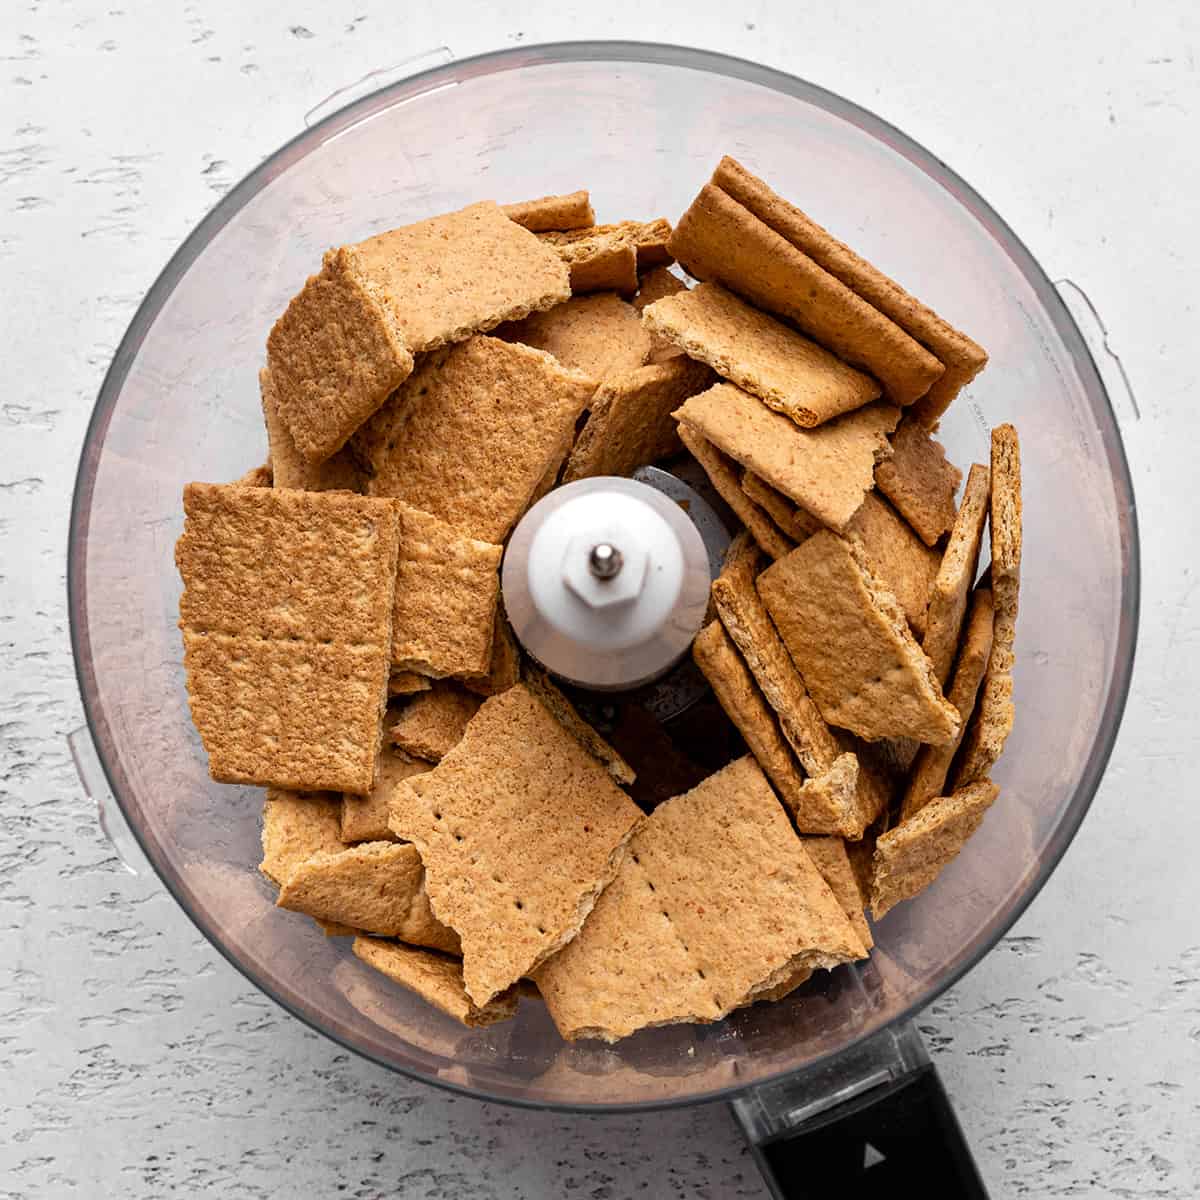 graham crackers in a food processor making the crust for this No Bake Cheesecake Recipe